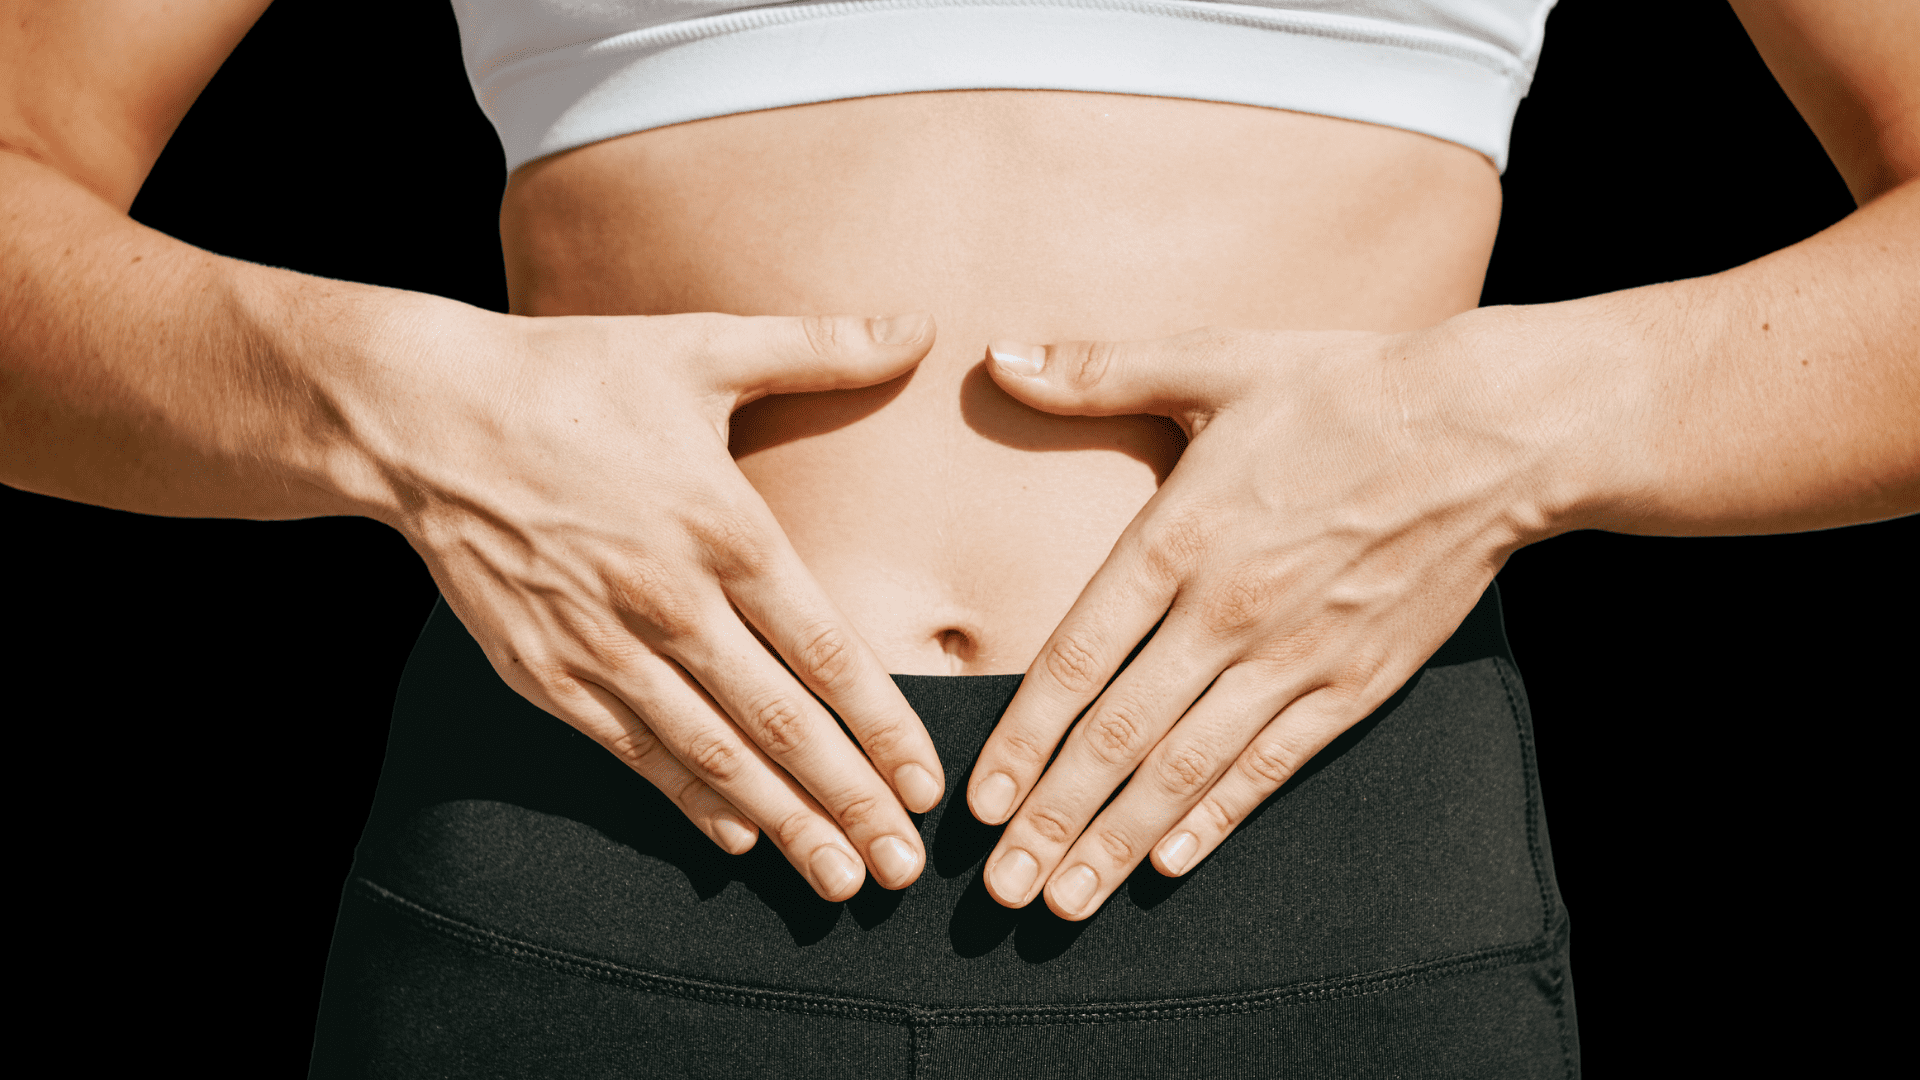 Full Tummy Tuck Vs Mini Tummy Tuck: Which Is Best For Me?